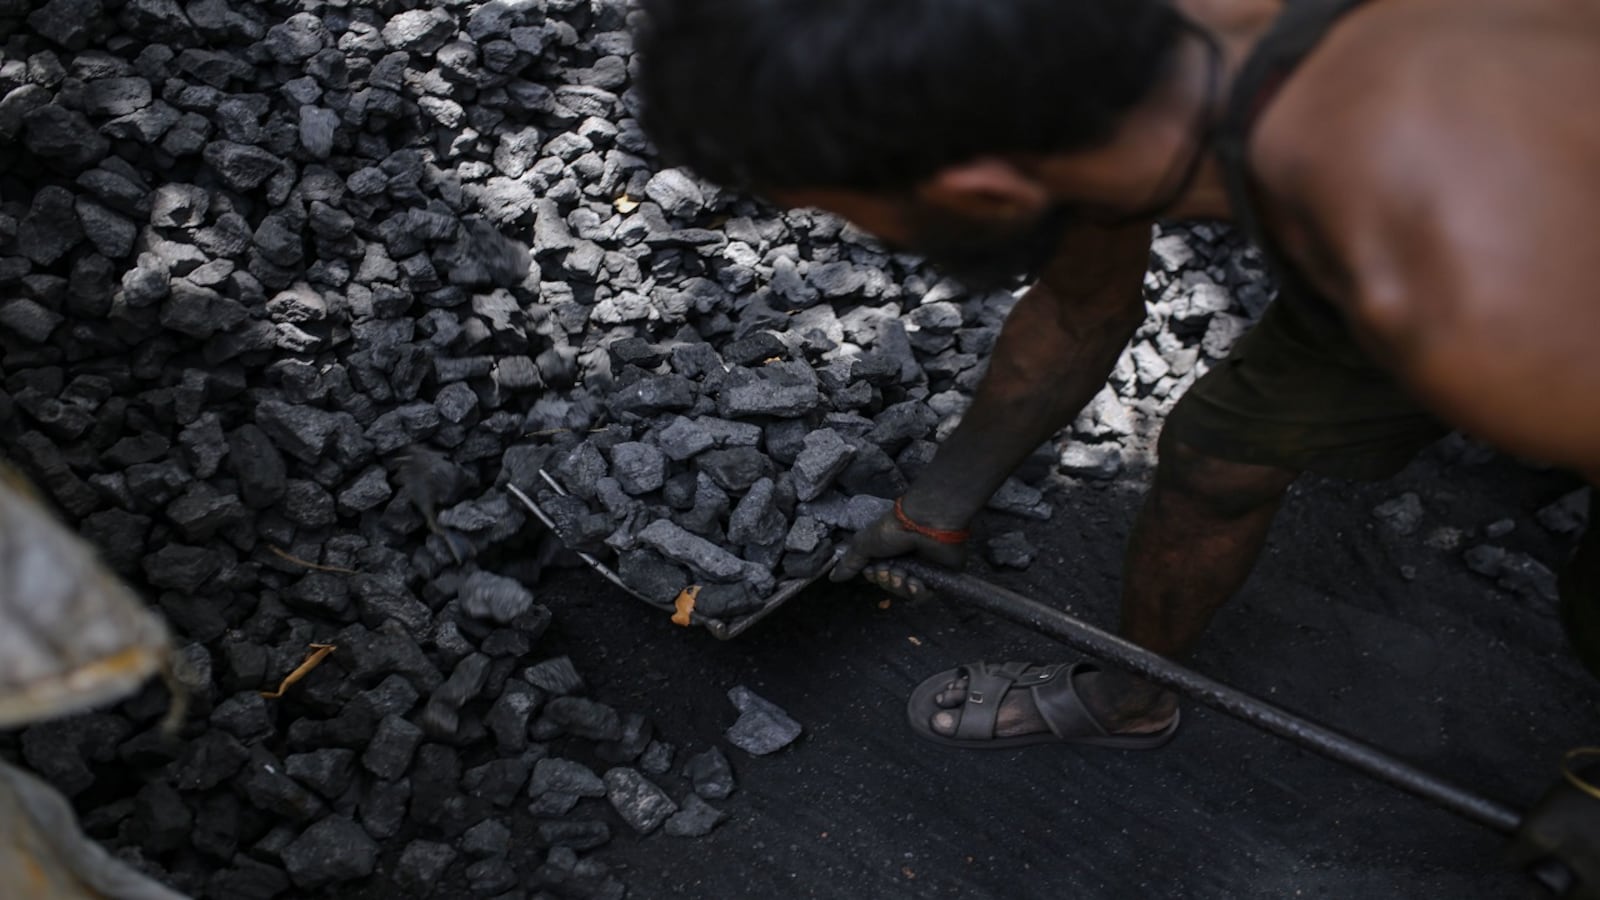 singapore's sembcorp accused of greenwashing in india coal-powered asset sale